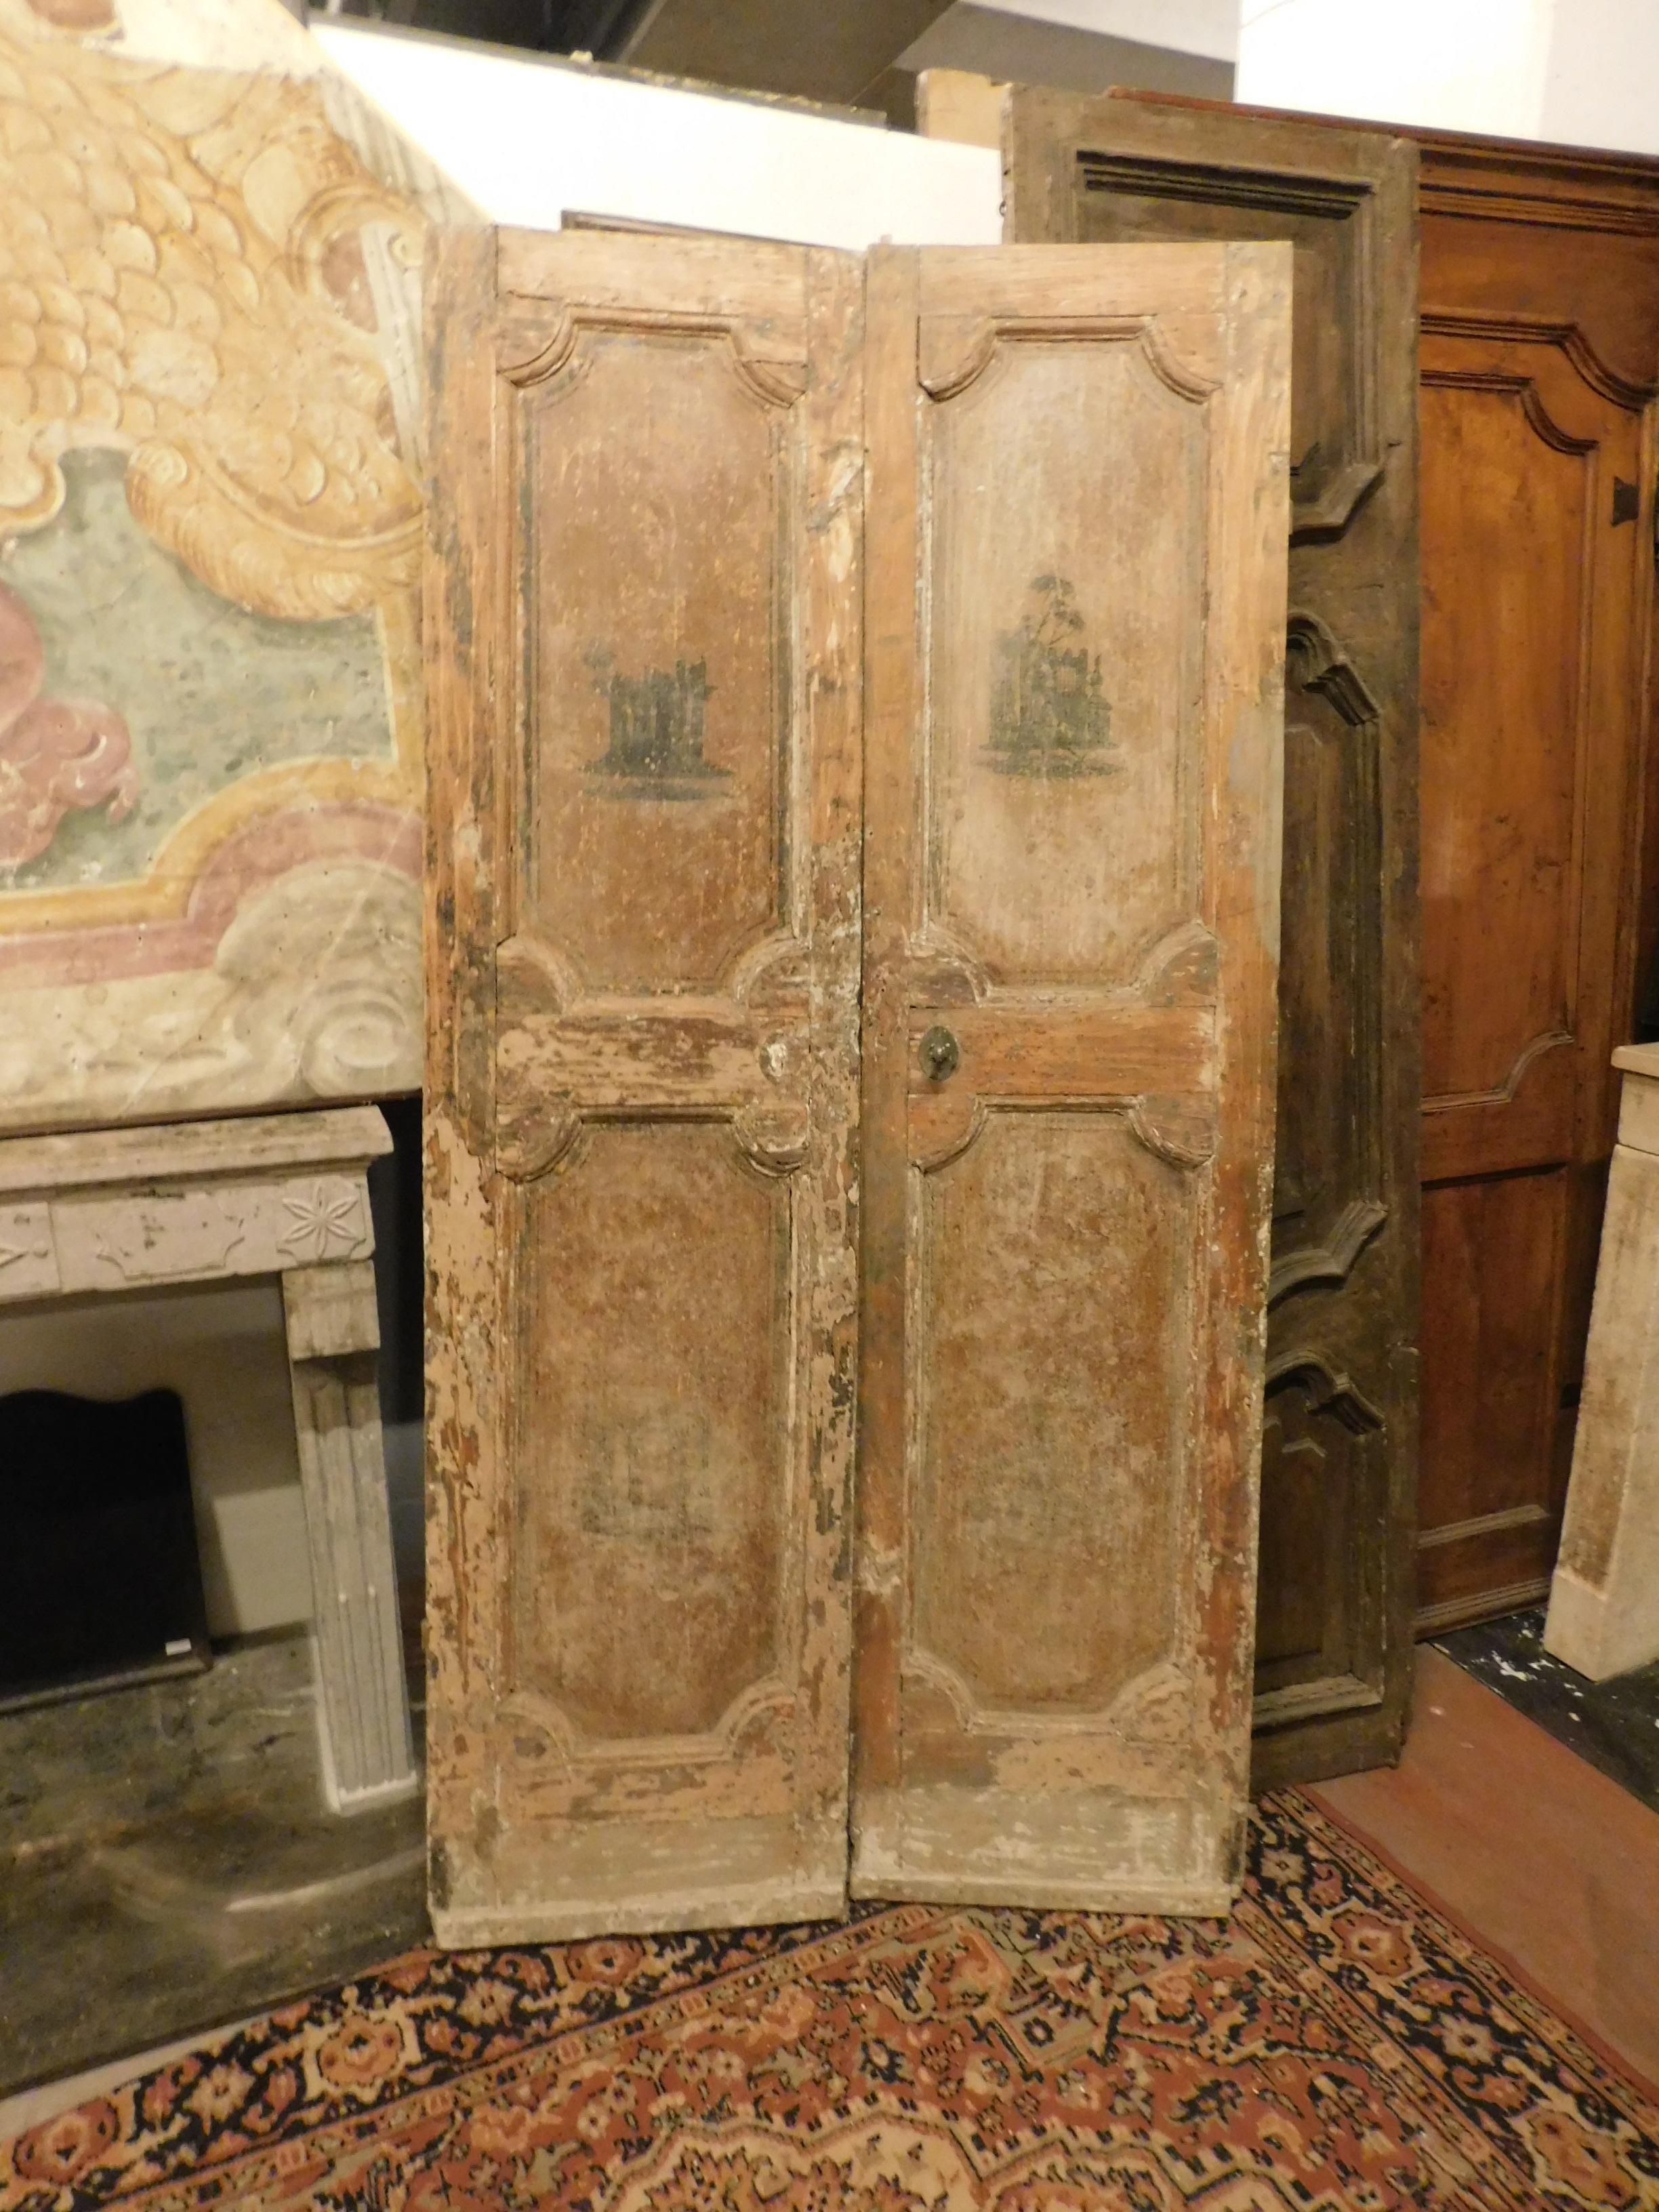 Antique beige lacquered double door with chinoiserie sculptures very popular at the time of the door's invoice, coming from an 18th century noble house of Italy, very beautiful and of great antiquarian value, it will be beautiful with a lightly